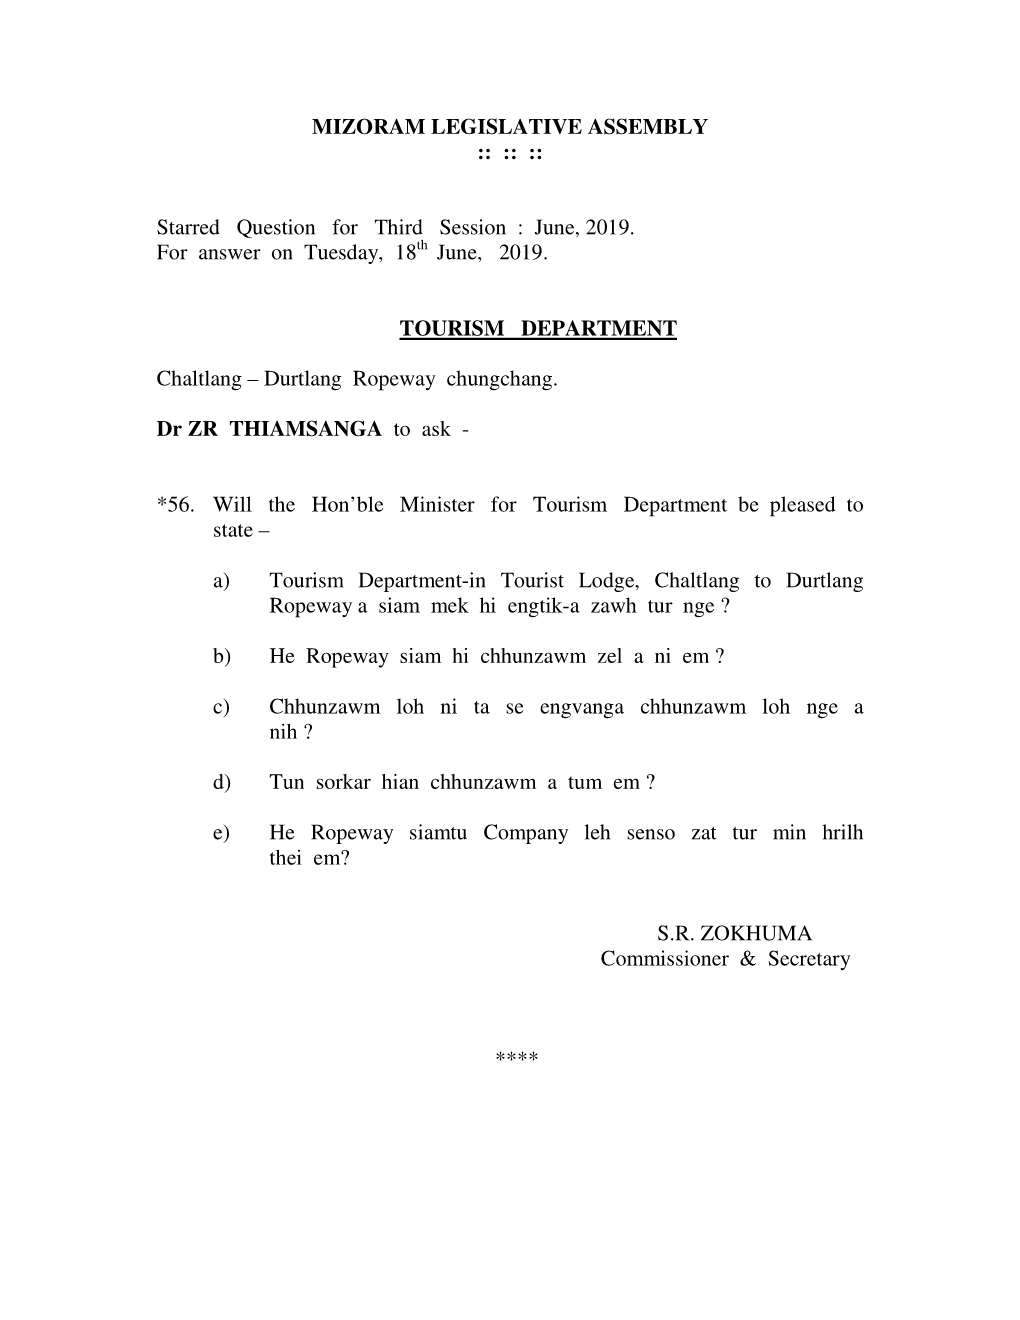 MIZORAM LEGISLATIVE ASSEMBLY :: :: :: Starred Question for Third Session : June, 2019. for Answer on Tuesday, 18